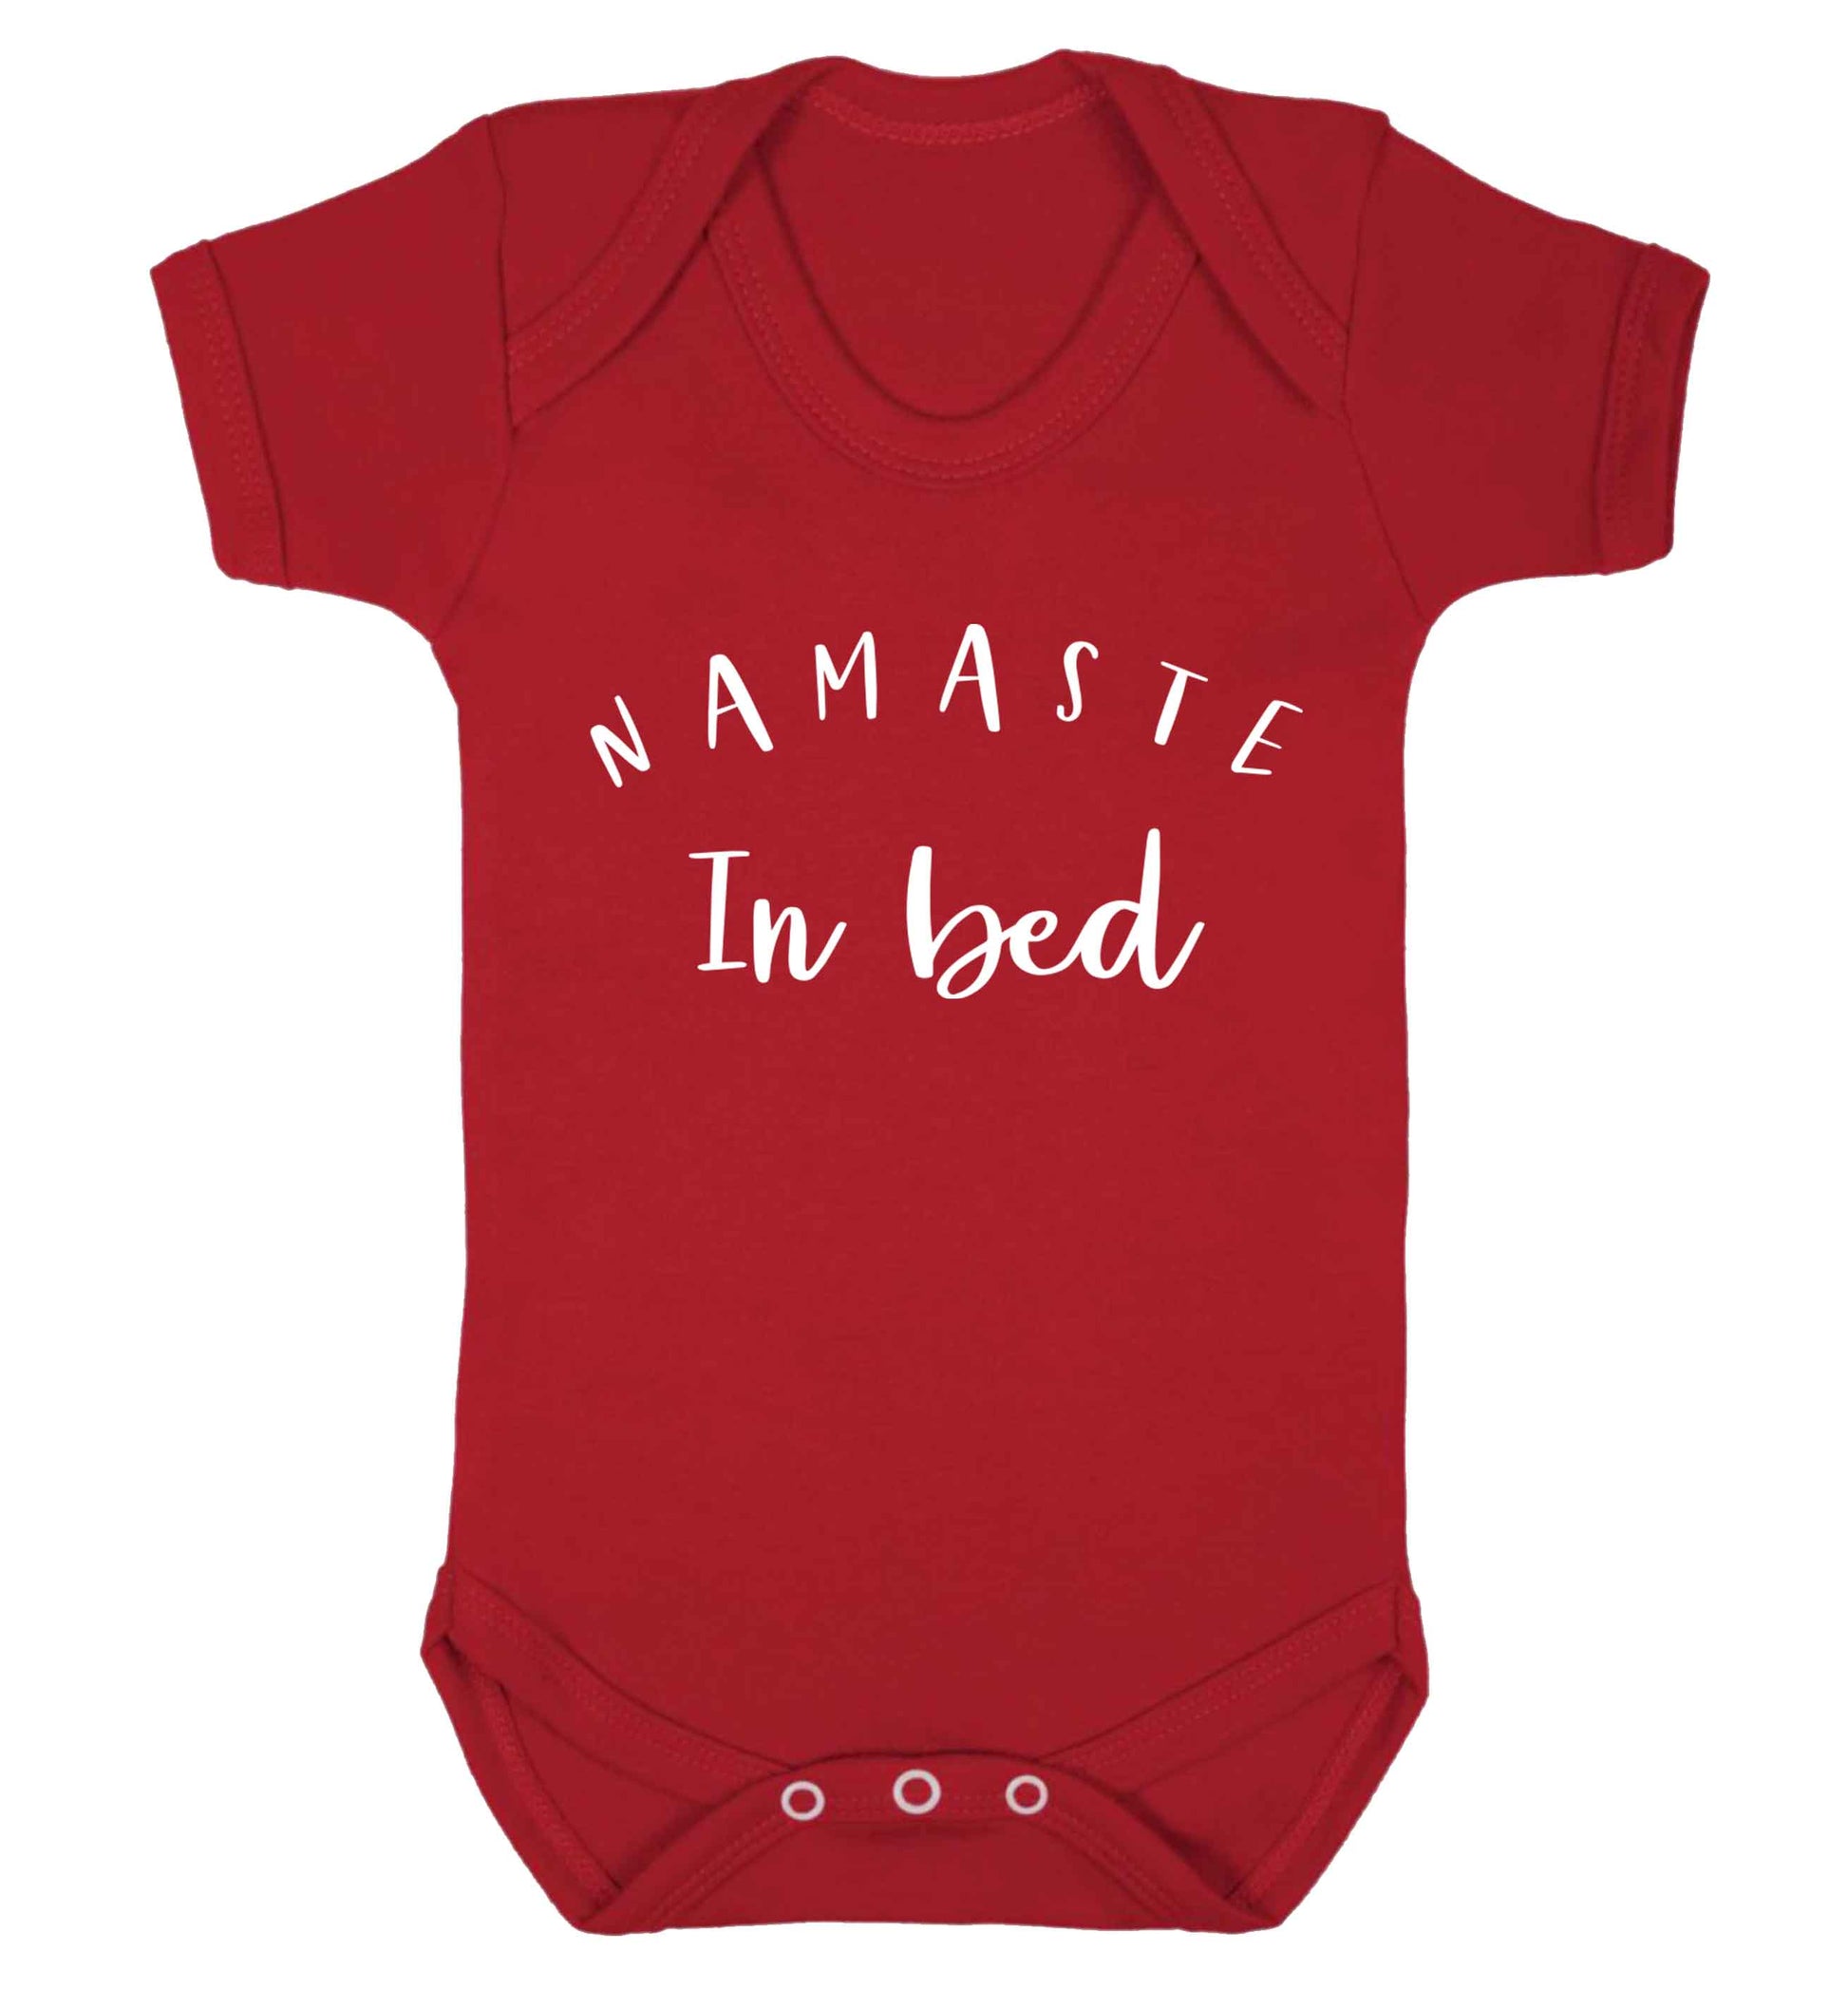 Namaste in bed Baby Vest red 18-24 months